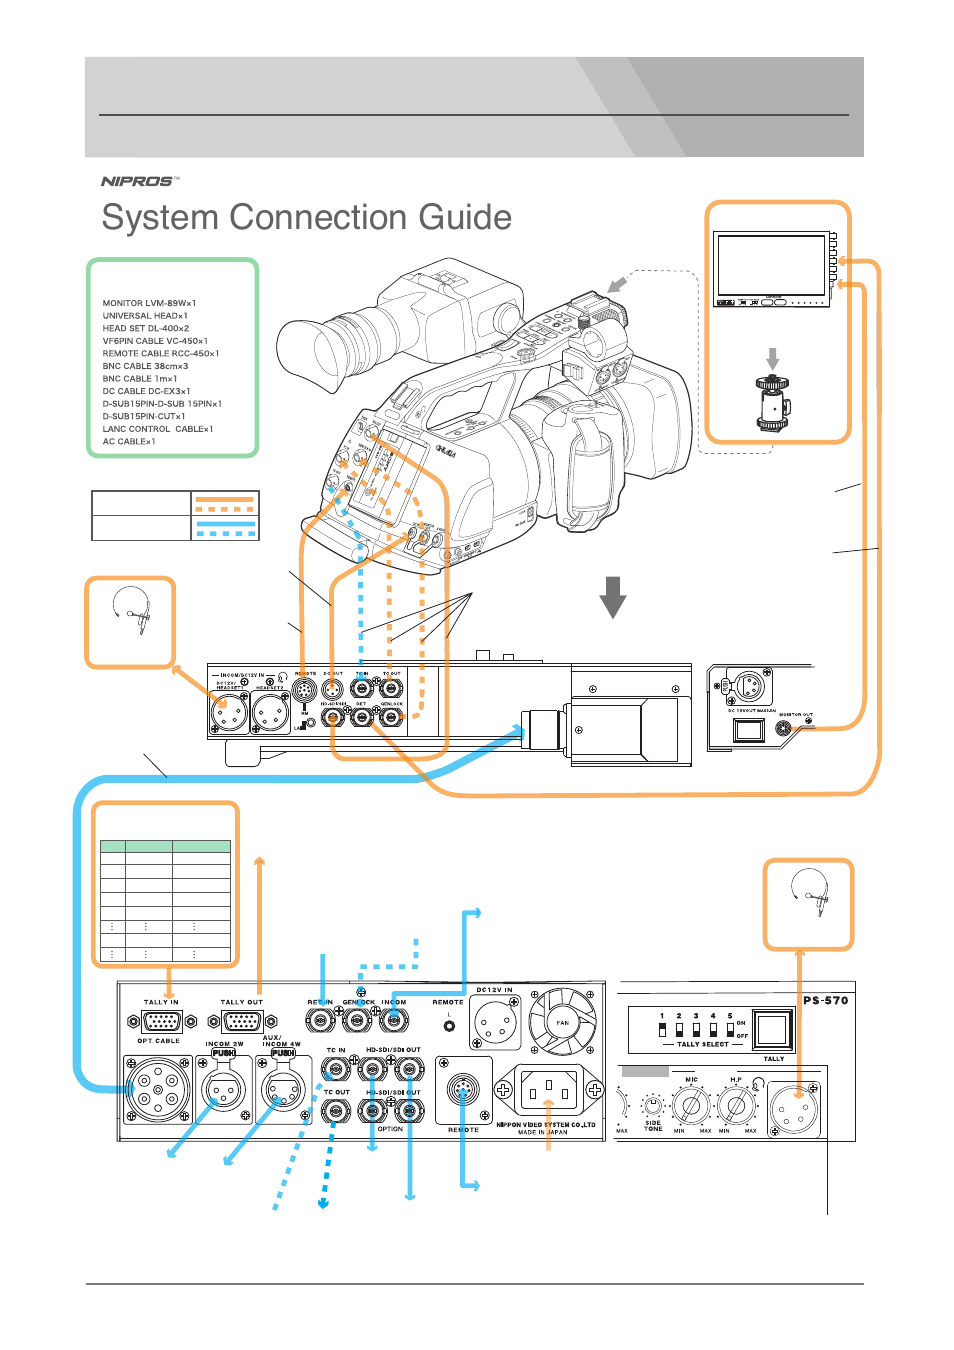 PS-270 System Connection Manual